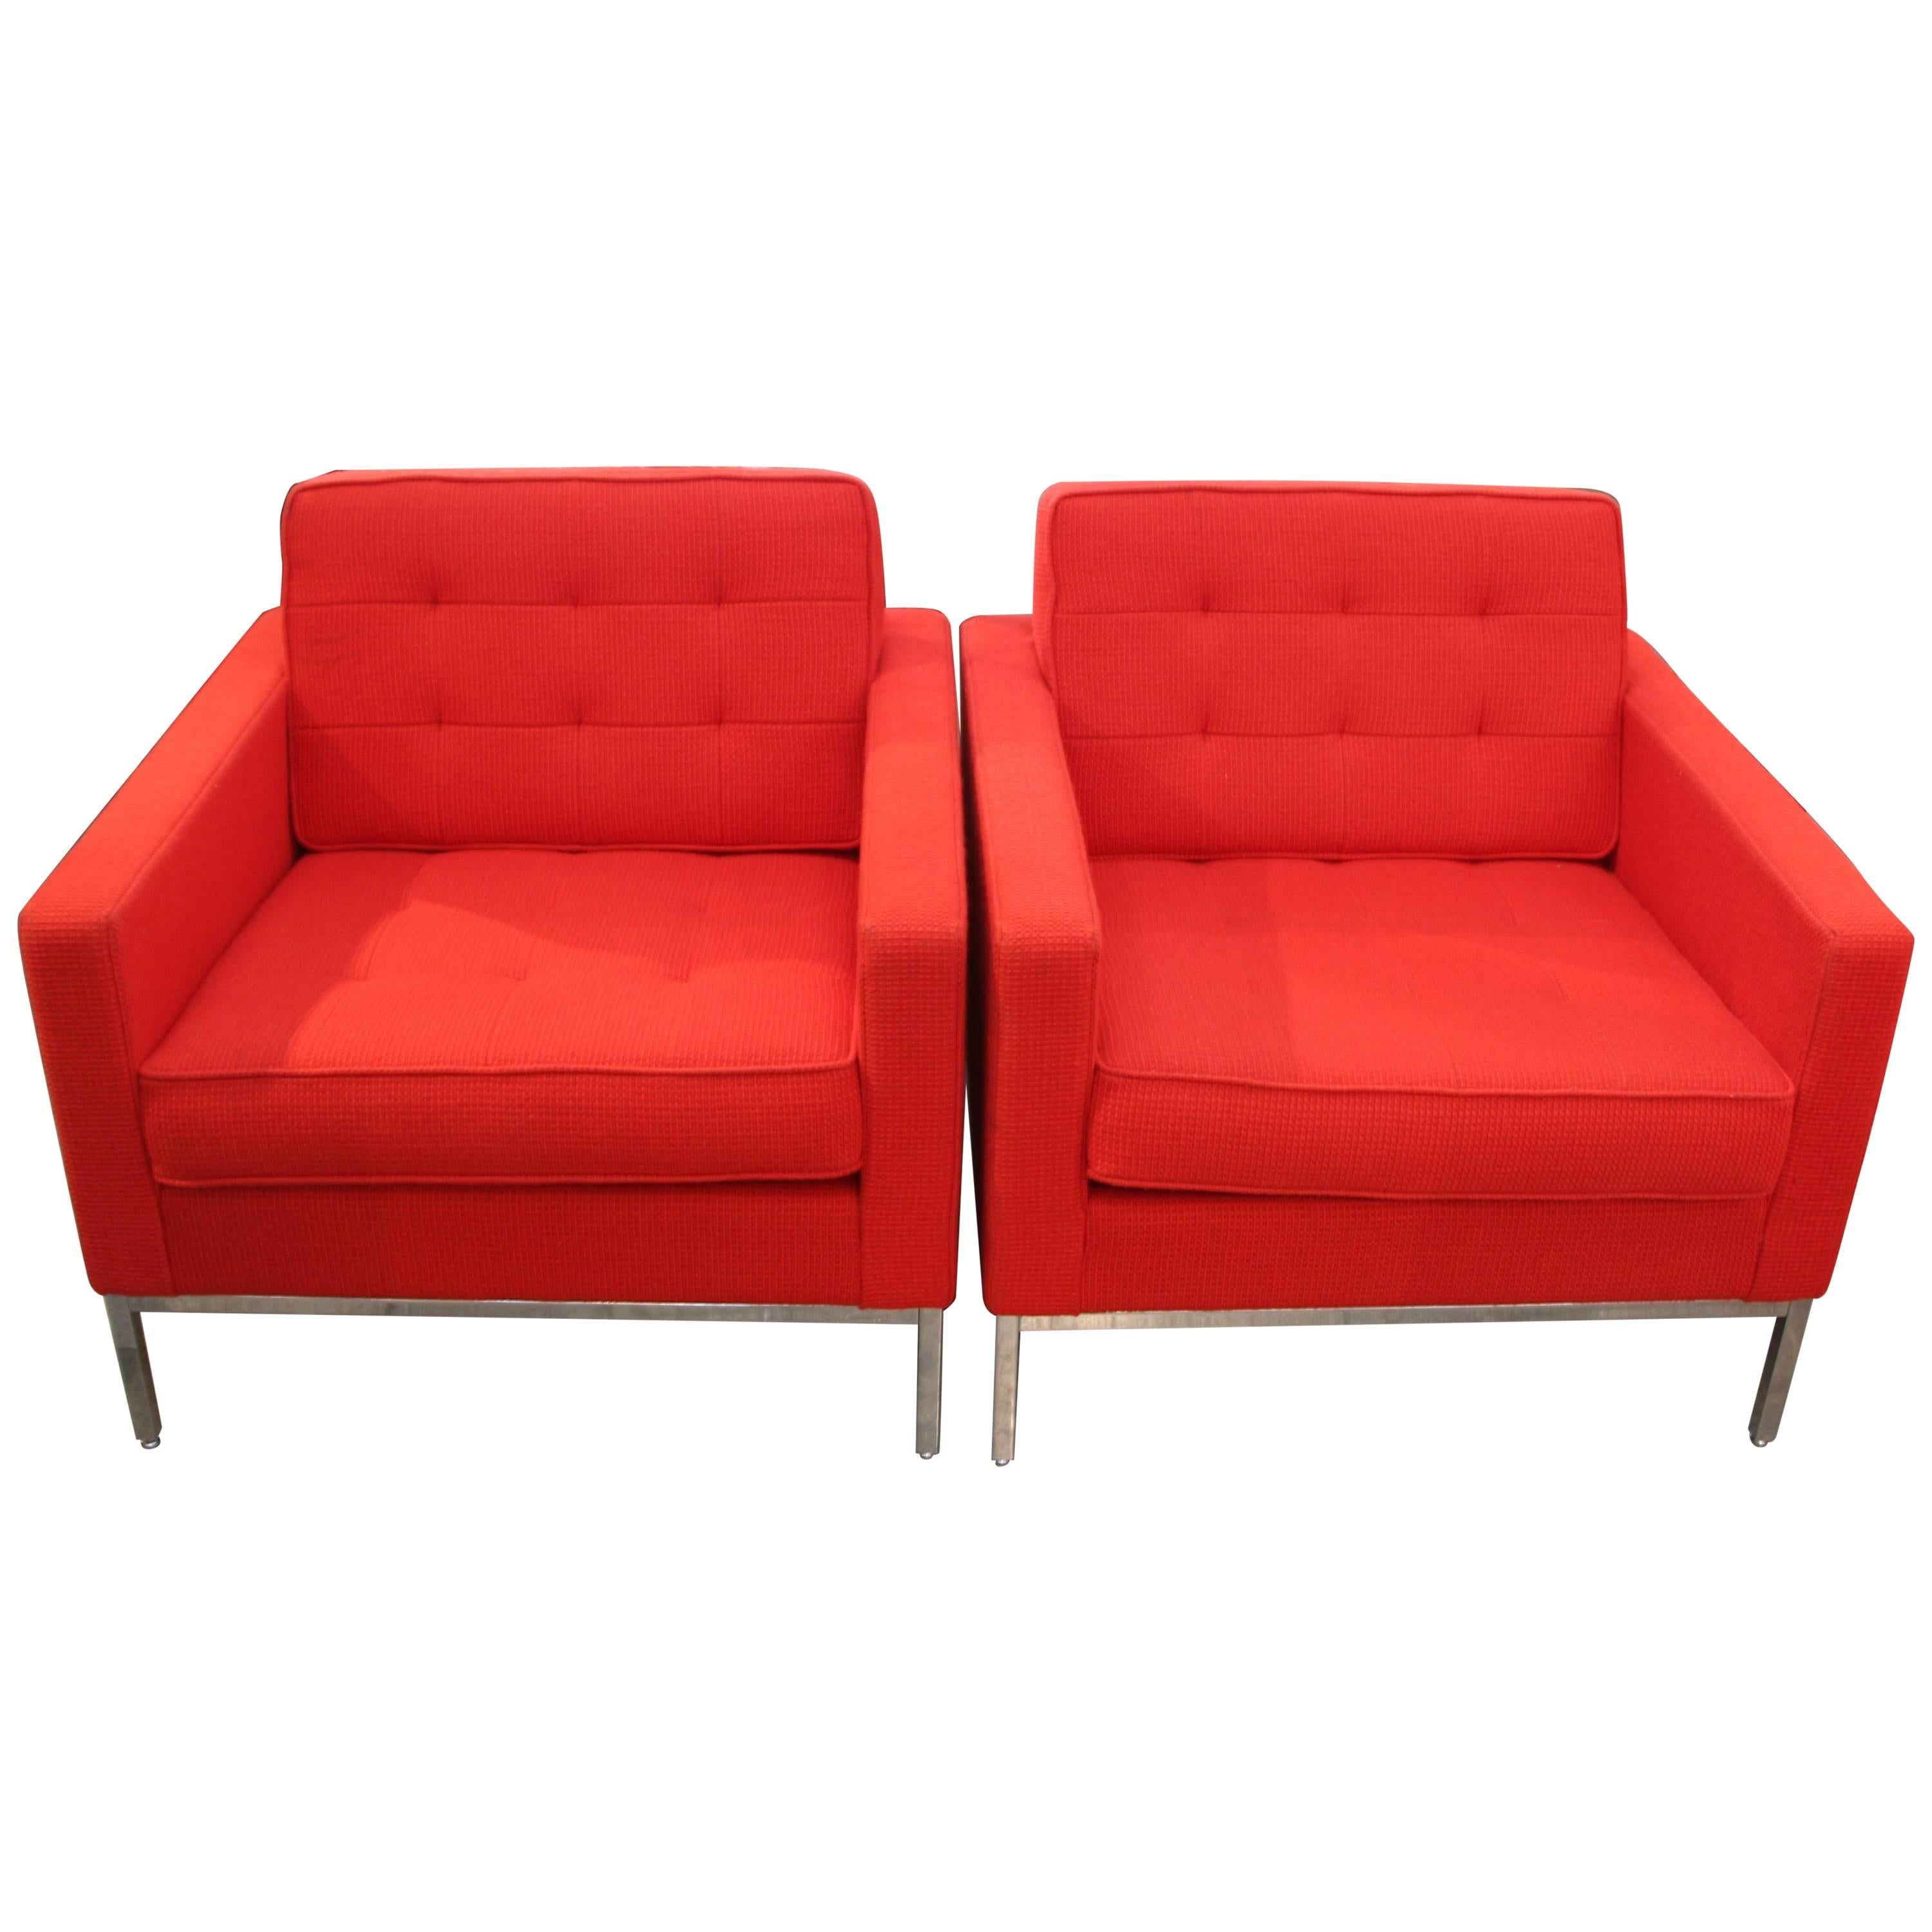 Pair of Florence Knoll Chairs in Cato Fire Red with Label Dated 2014